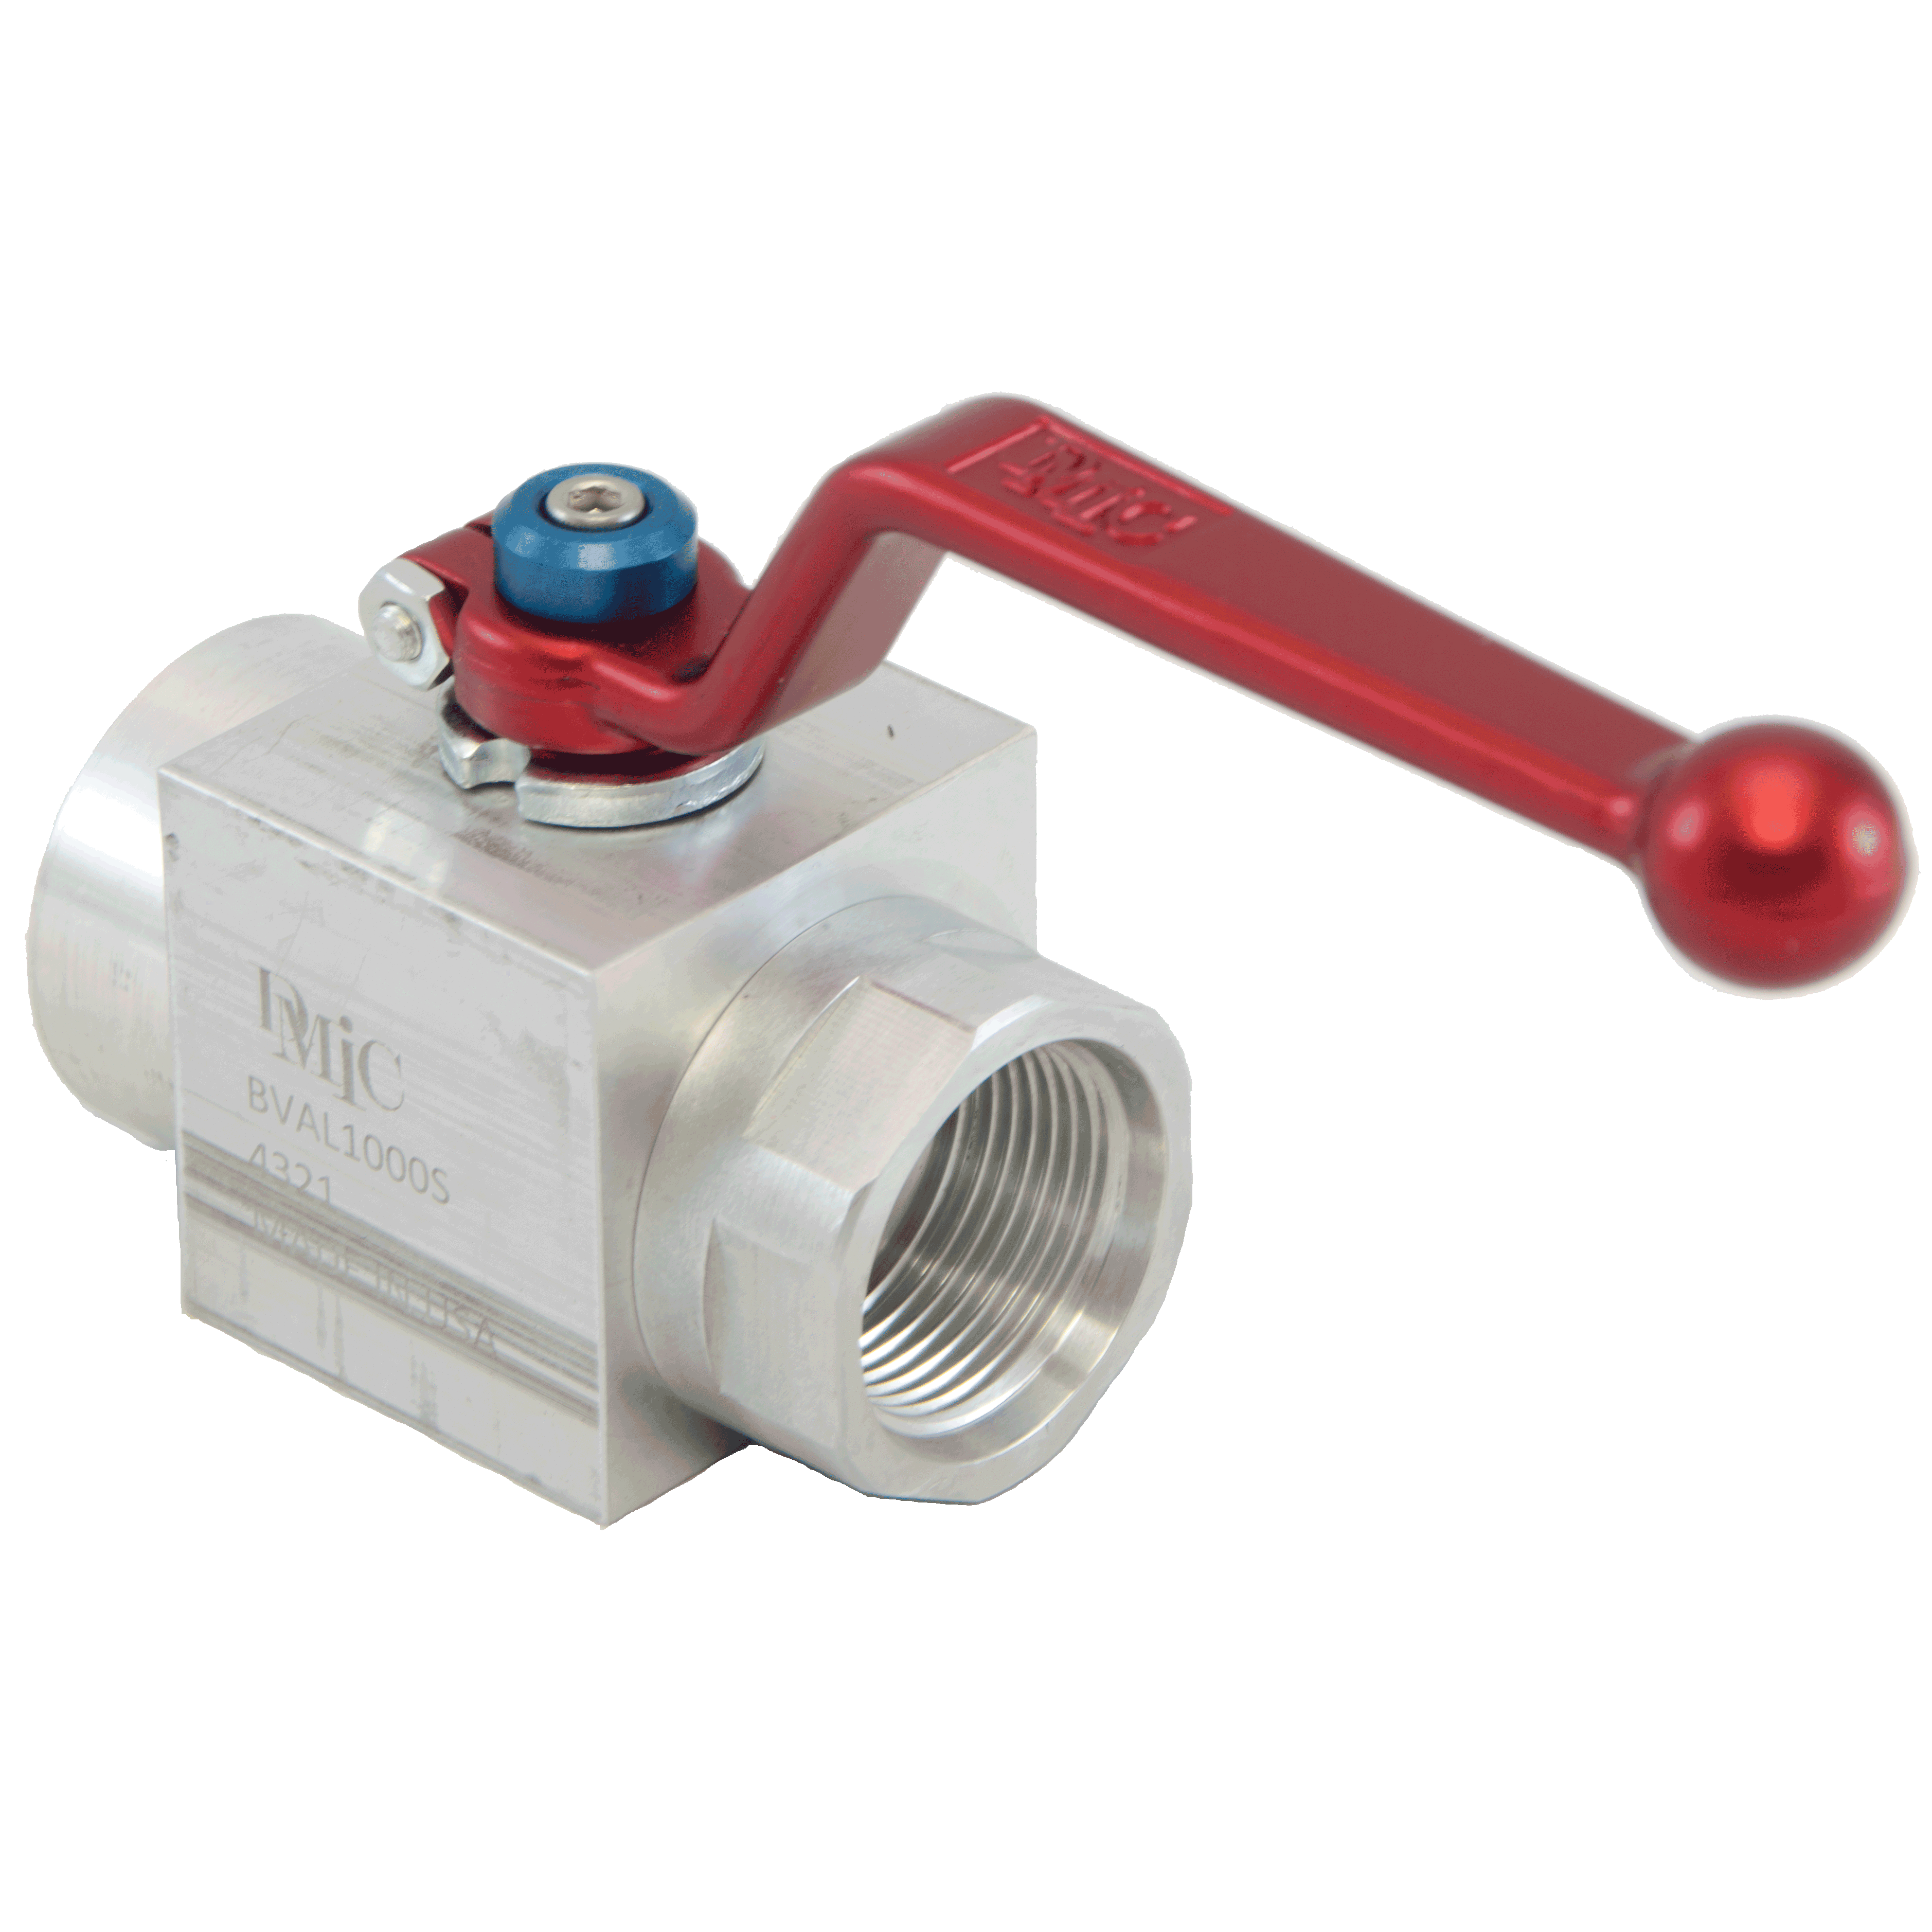 BVAL-3000N-4321-AZZN : DMIC Suction Ball Valve, 3 NPT, Aluminum, 400psi, Two-Way, with Locking Handle